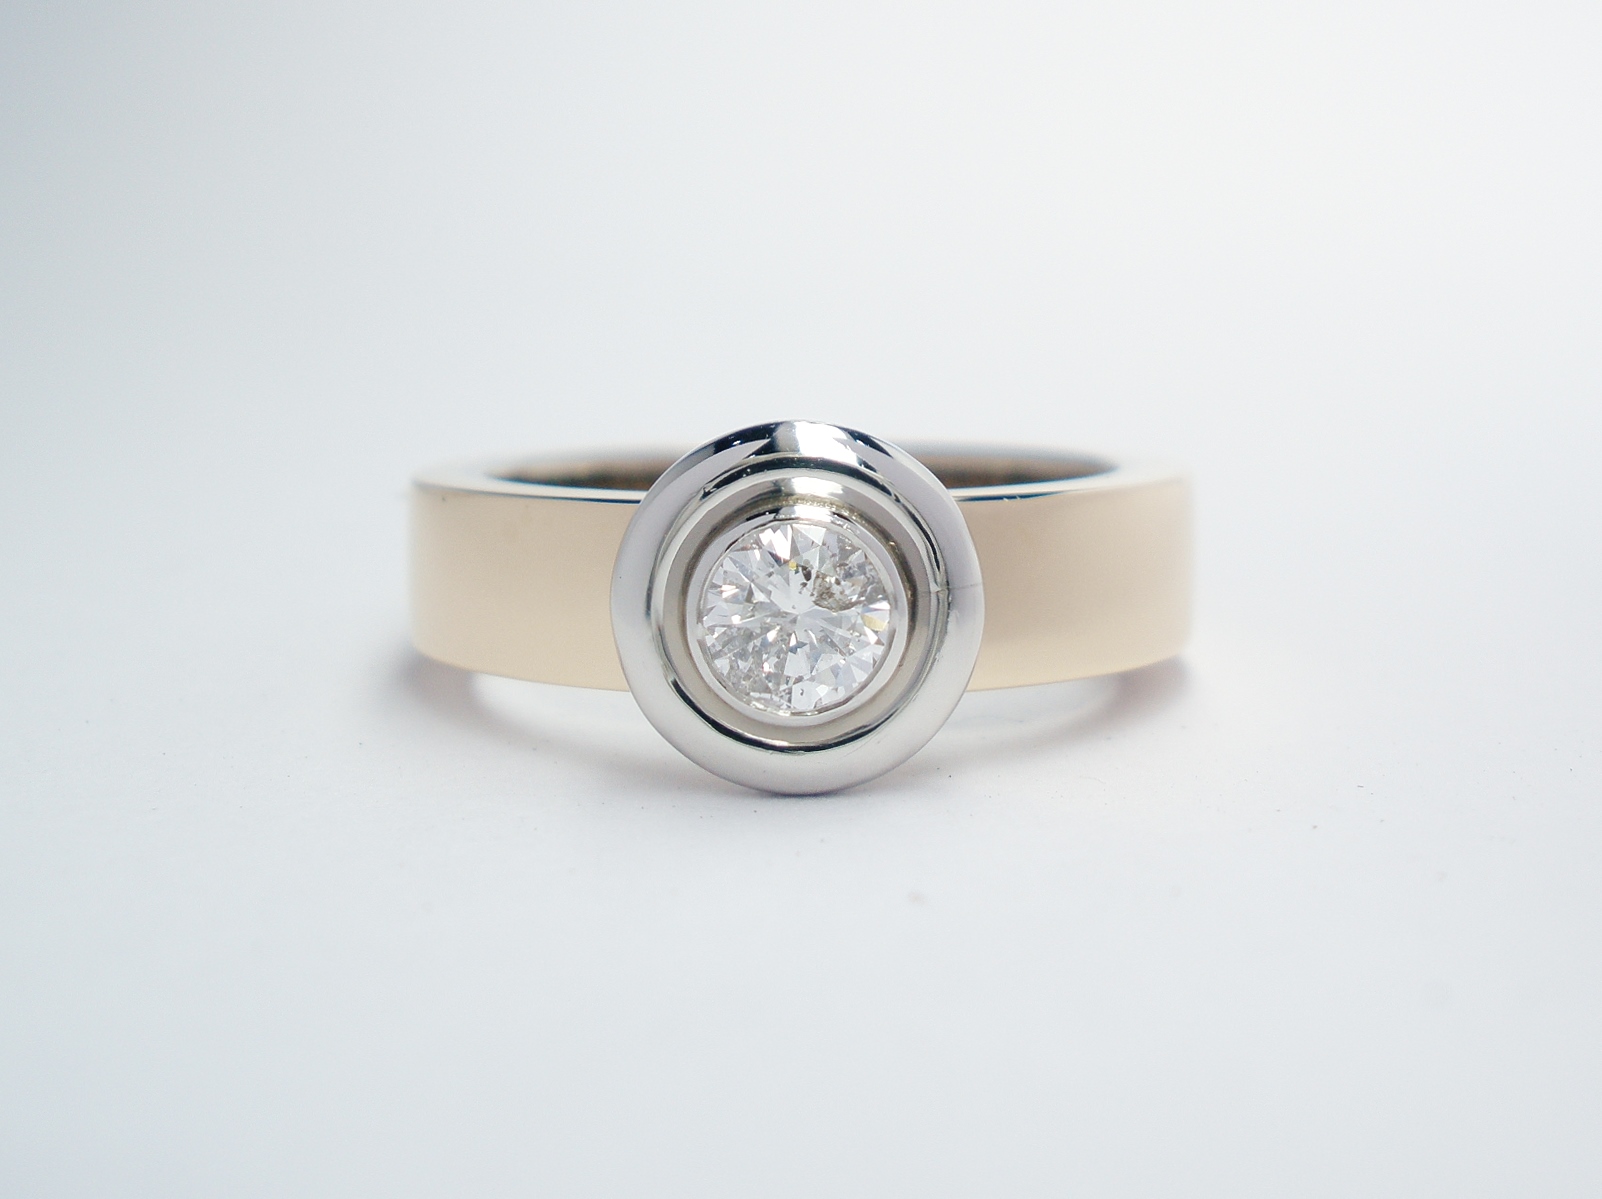 A single stone round brilliant cut diamond 'Doughnut' style ring mounted in 9ct. yellow gold and platinum.